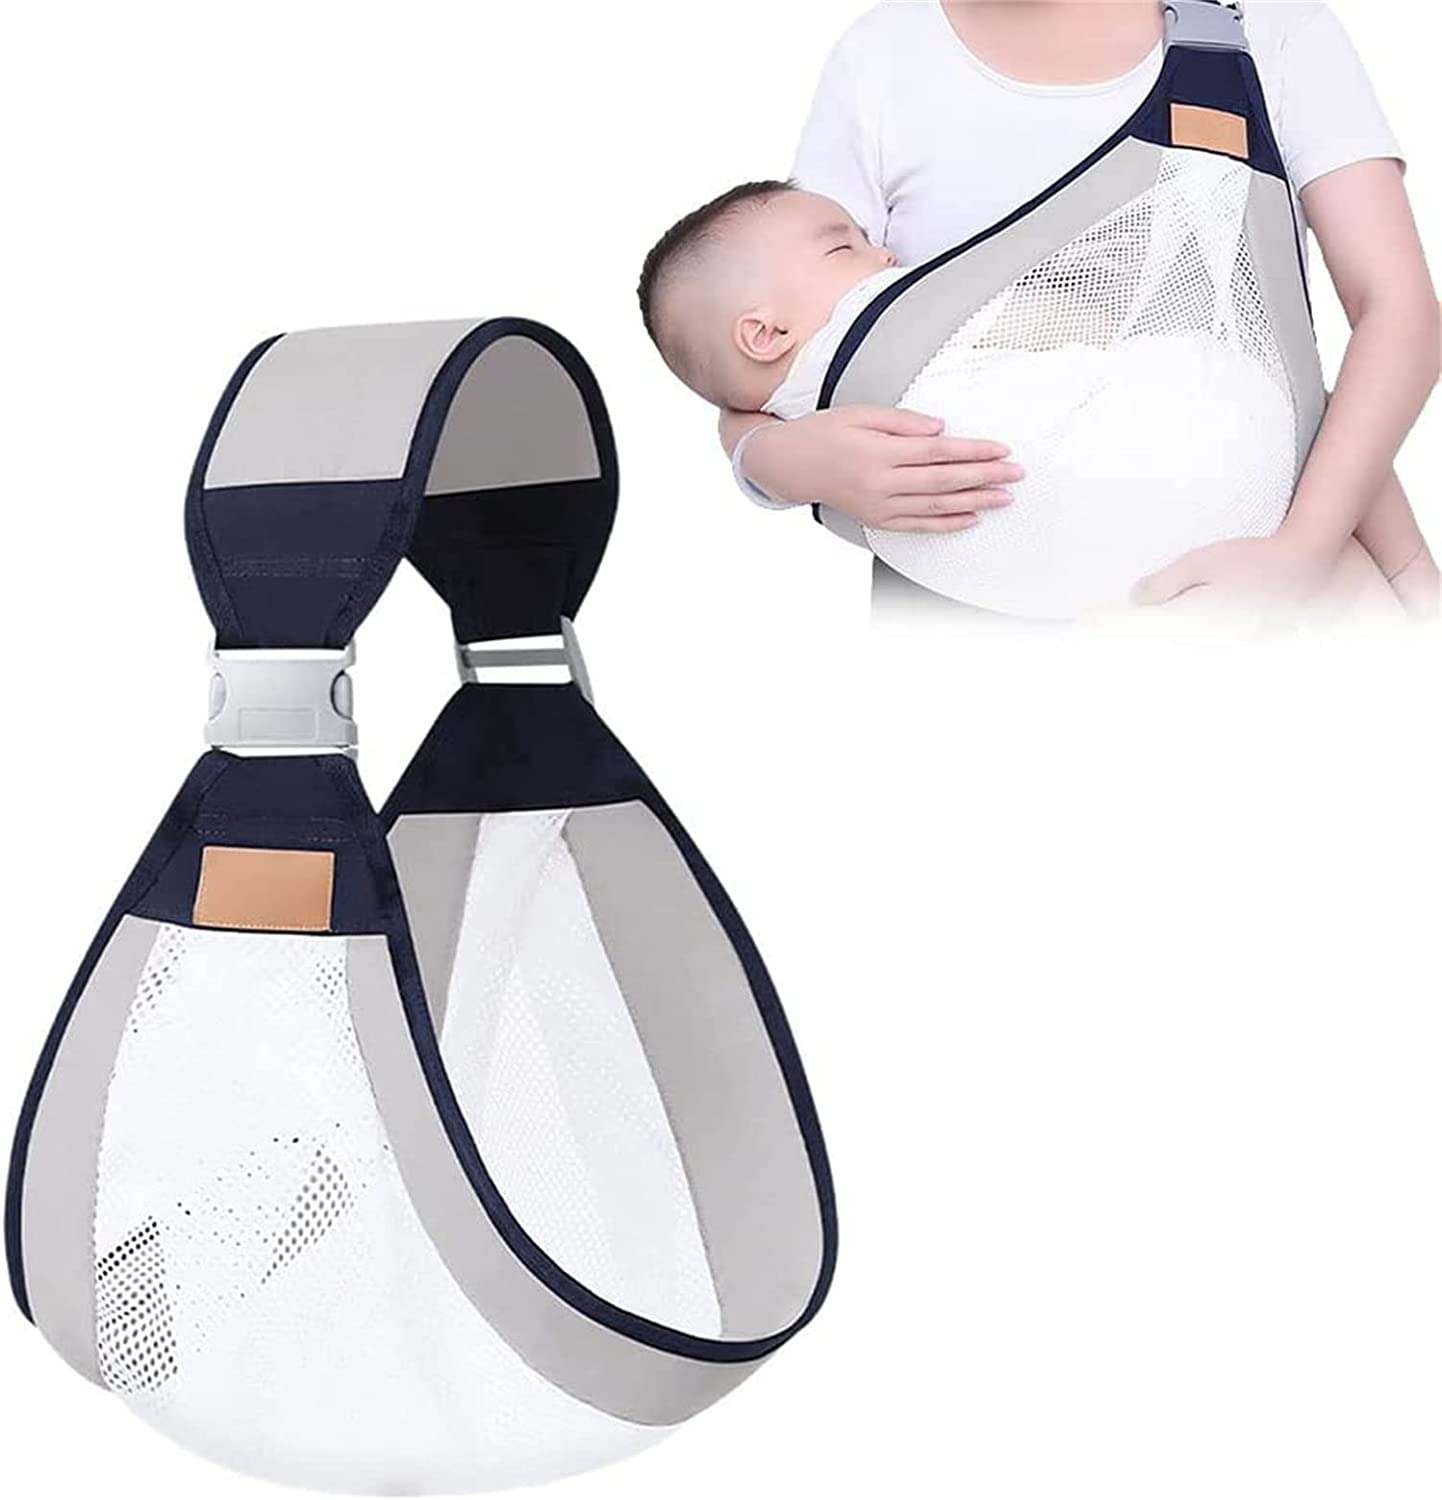 Baby Carrier, Ergonomic Baby Strap one Shoulder Labor-Saving Polyester Baby Half Wrapped Sling (Random Color)